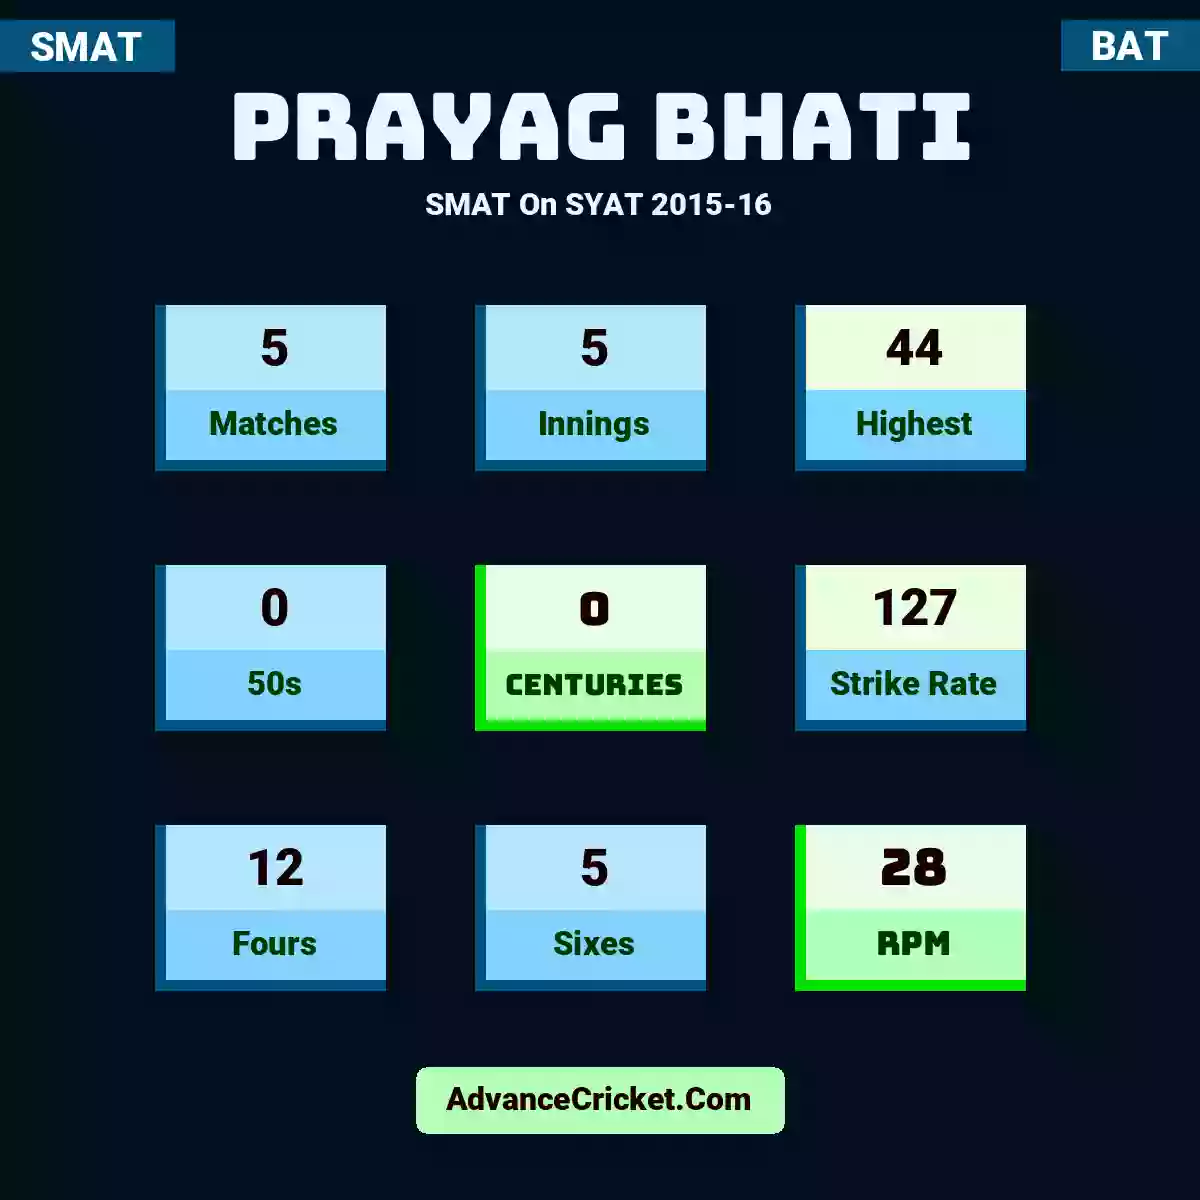 Prayag Bhati SMAT  On SYAT 2015-16, Prayag Bhati played 5 matches, scored 44 runs as highest, 0 half-centuries, and 0 centuries, with a strike rate of 127. P.Bhati hit 12 fours and 5 sixes, with an RPM of 28.